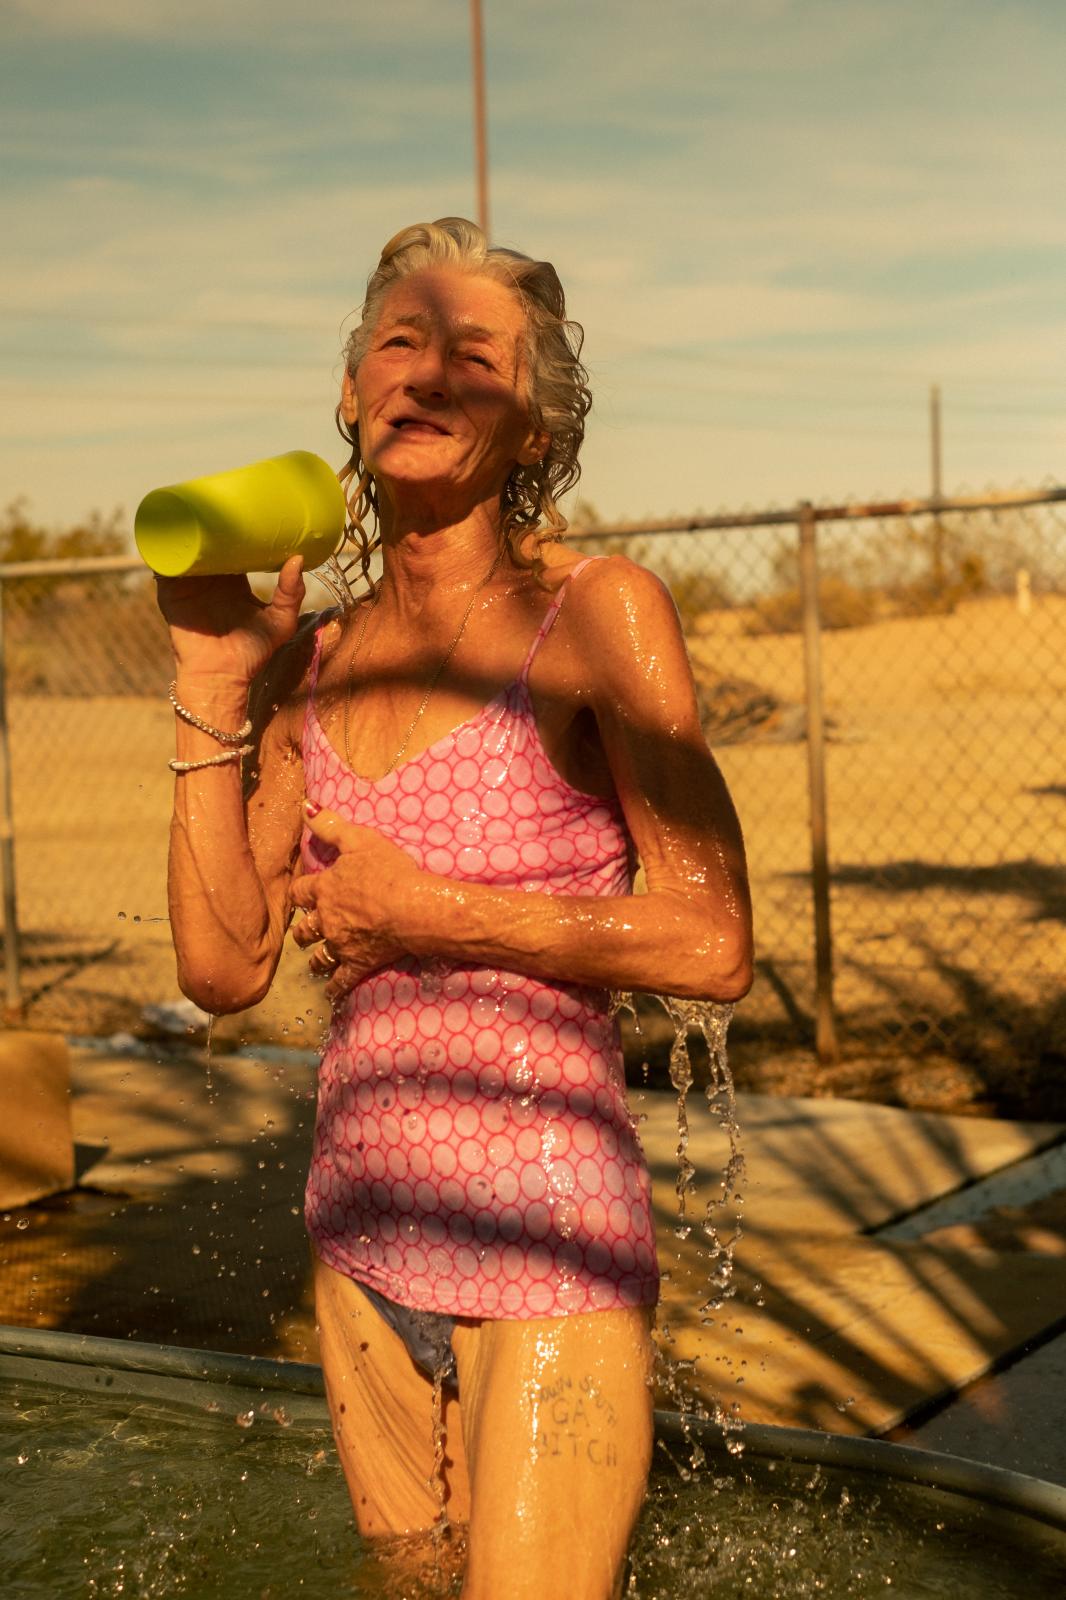 A Warm Winter (An Ongoing Journey) - Darleen at the Hot Springs. Holtville, California